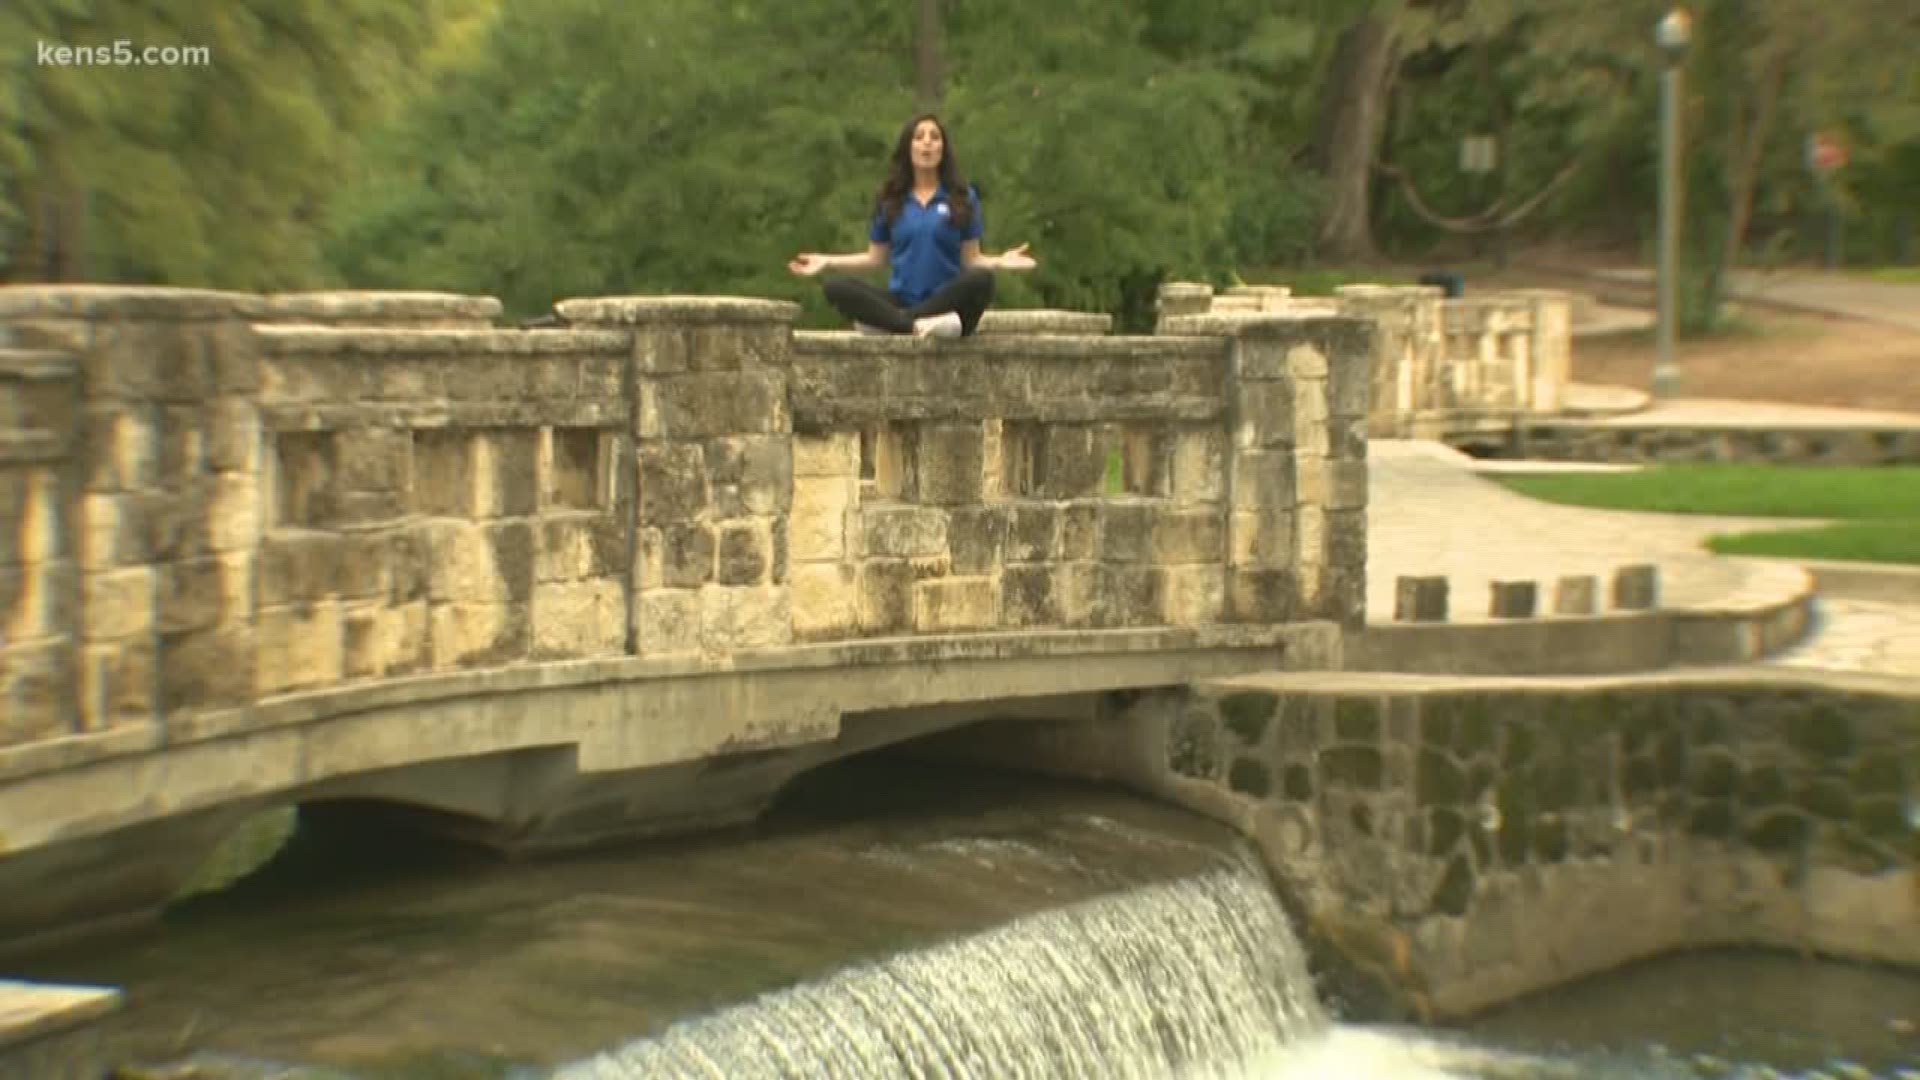 San Antonio's Brackenridge Park offers the beauty of nature and relaxation.